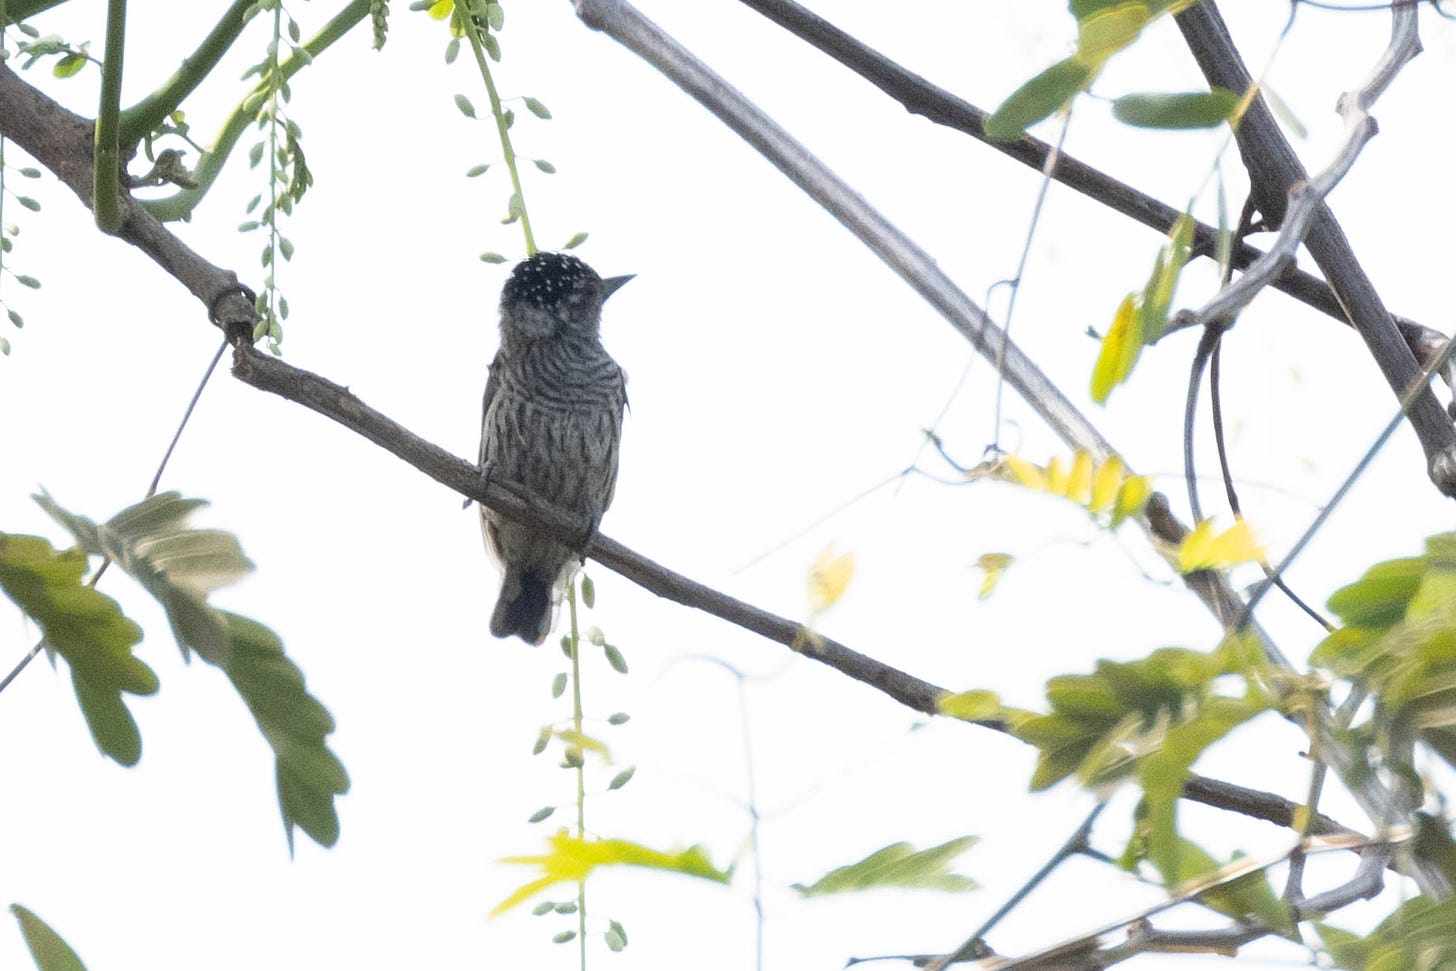 a tiny bird perched on a stick with vertical barring across the belly, horizontal barring across the breast, and a black, white-speckled cap. it is in the left third of the image, looking up and to the right, set against a backlit white sky.